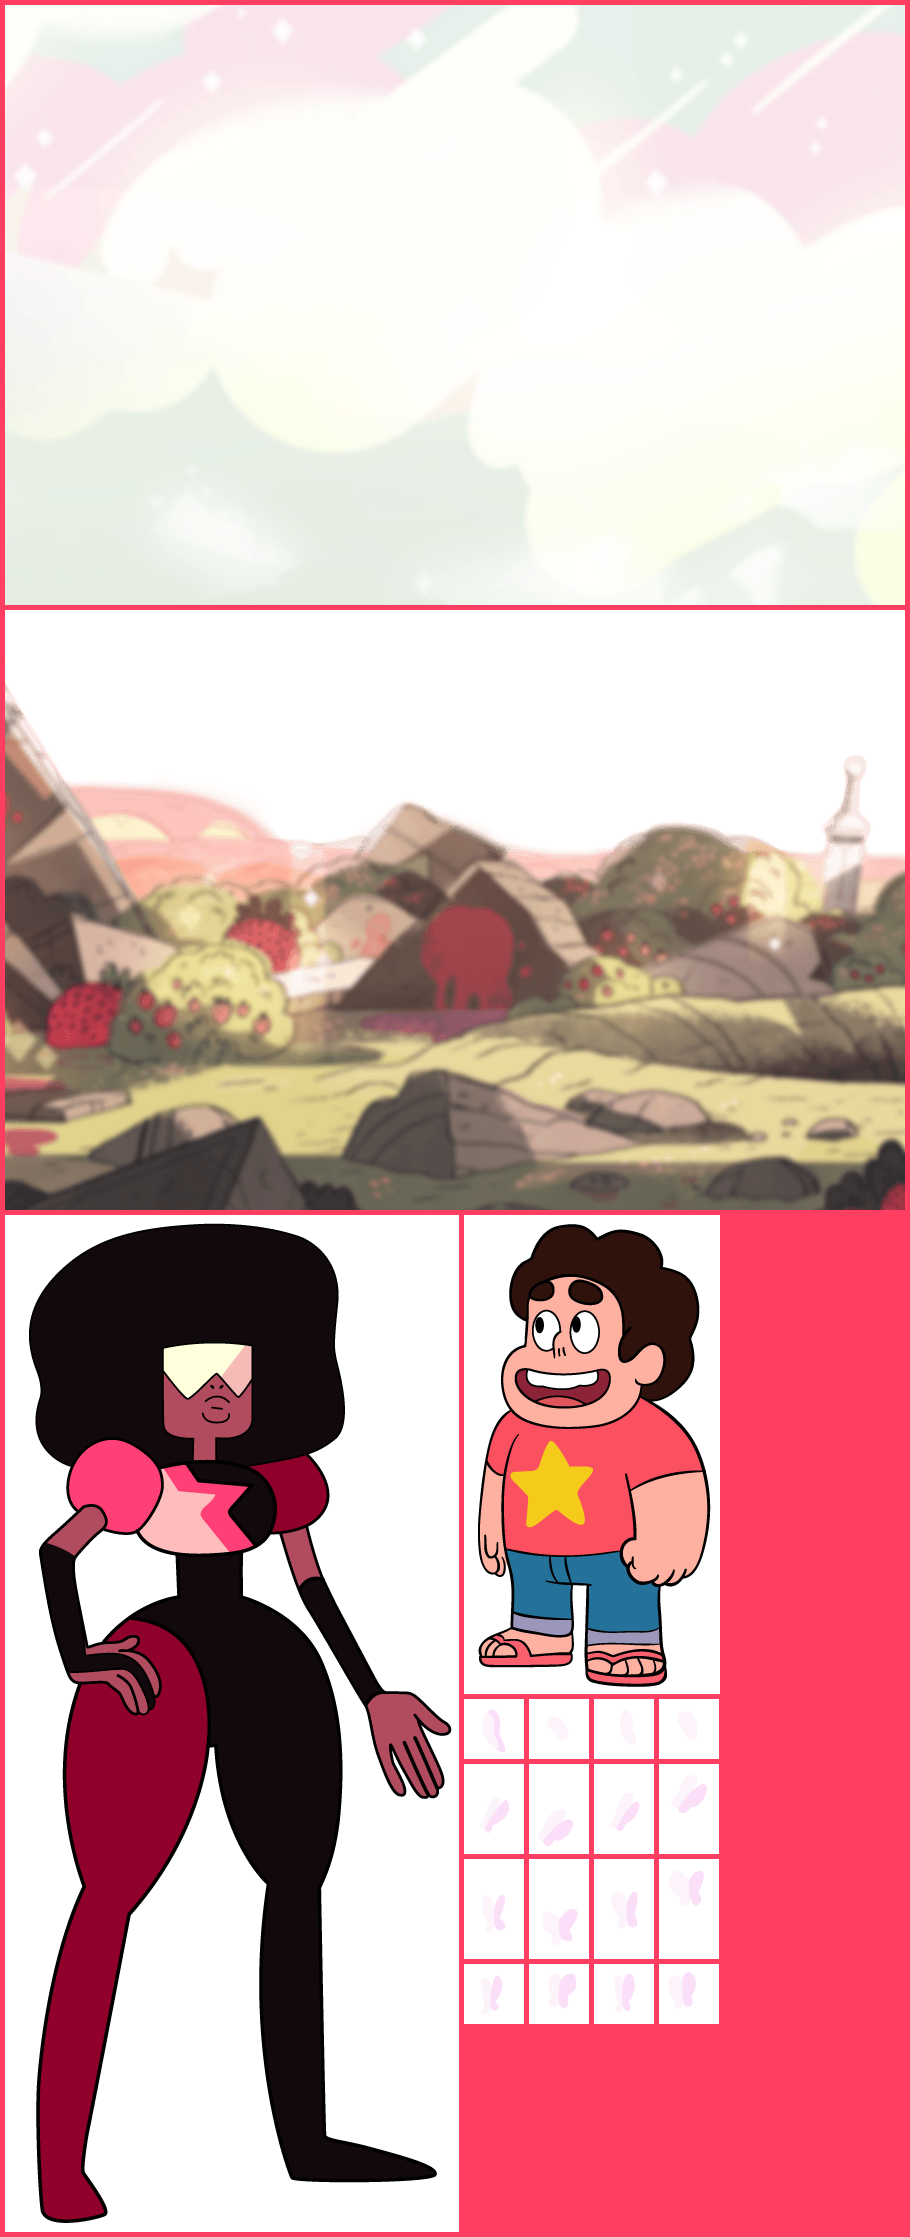 Steven Universe: Shifting Temple - Introduction